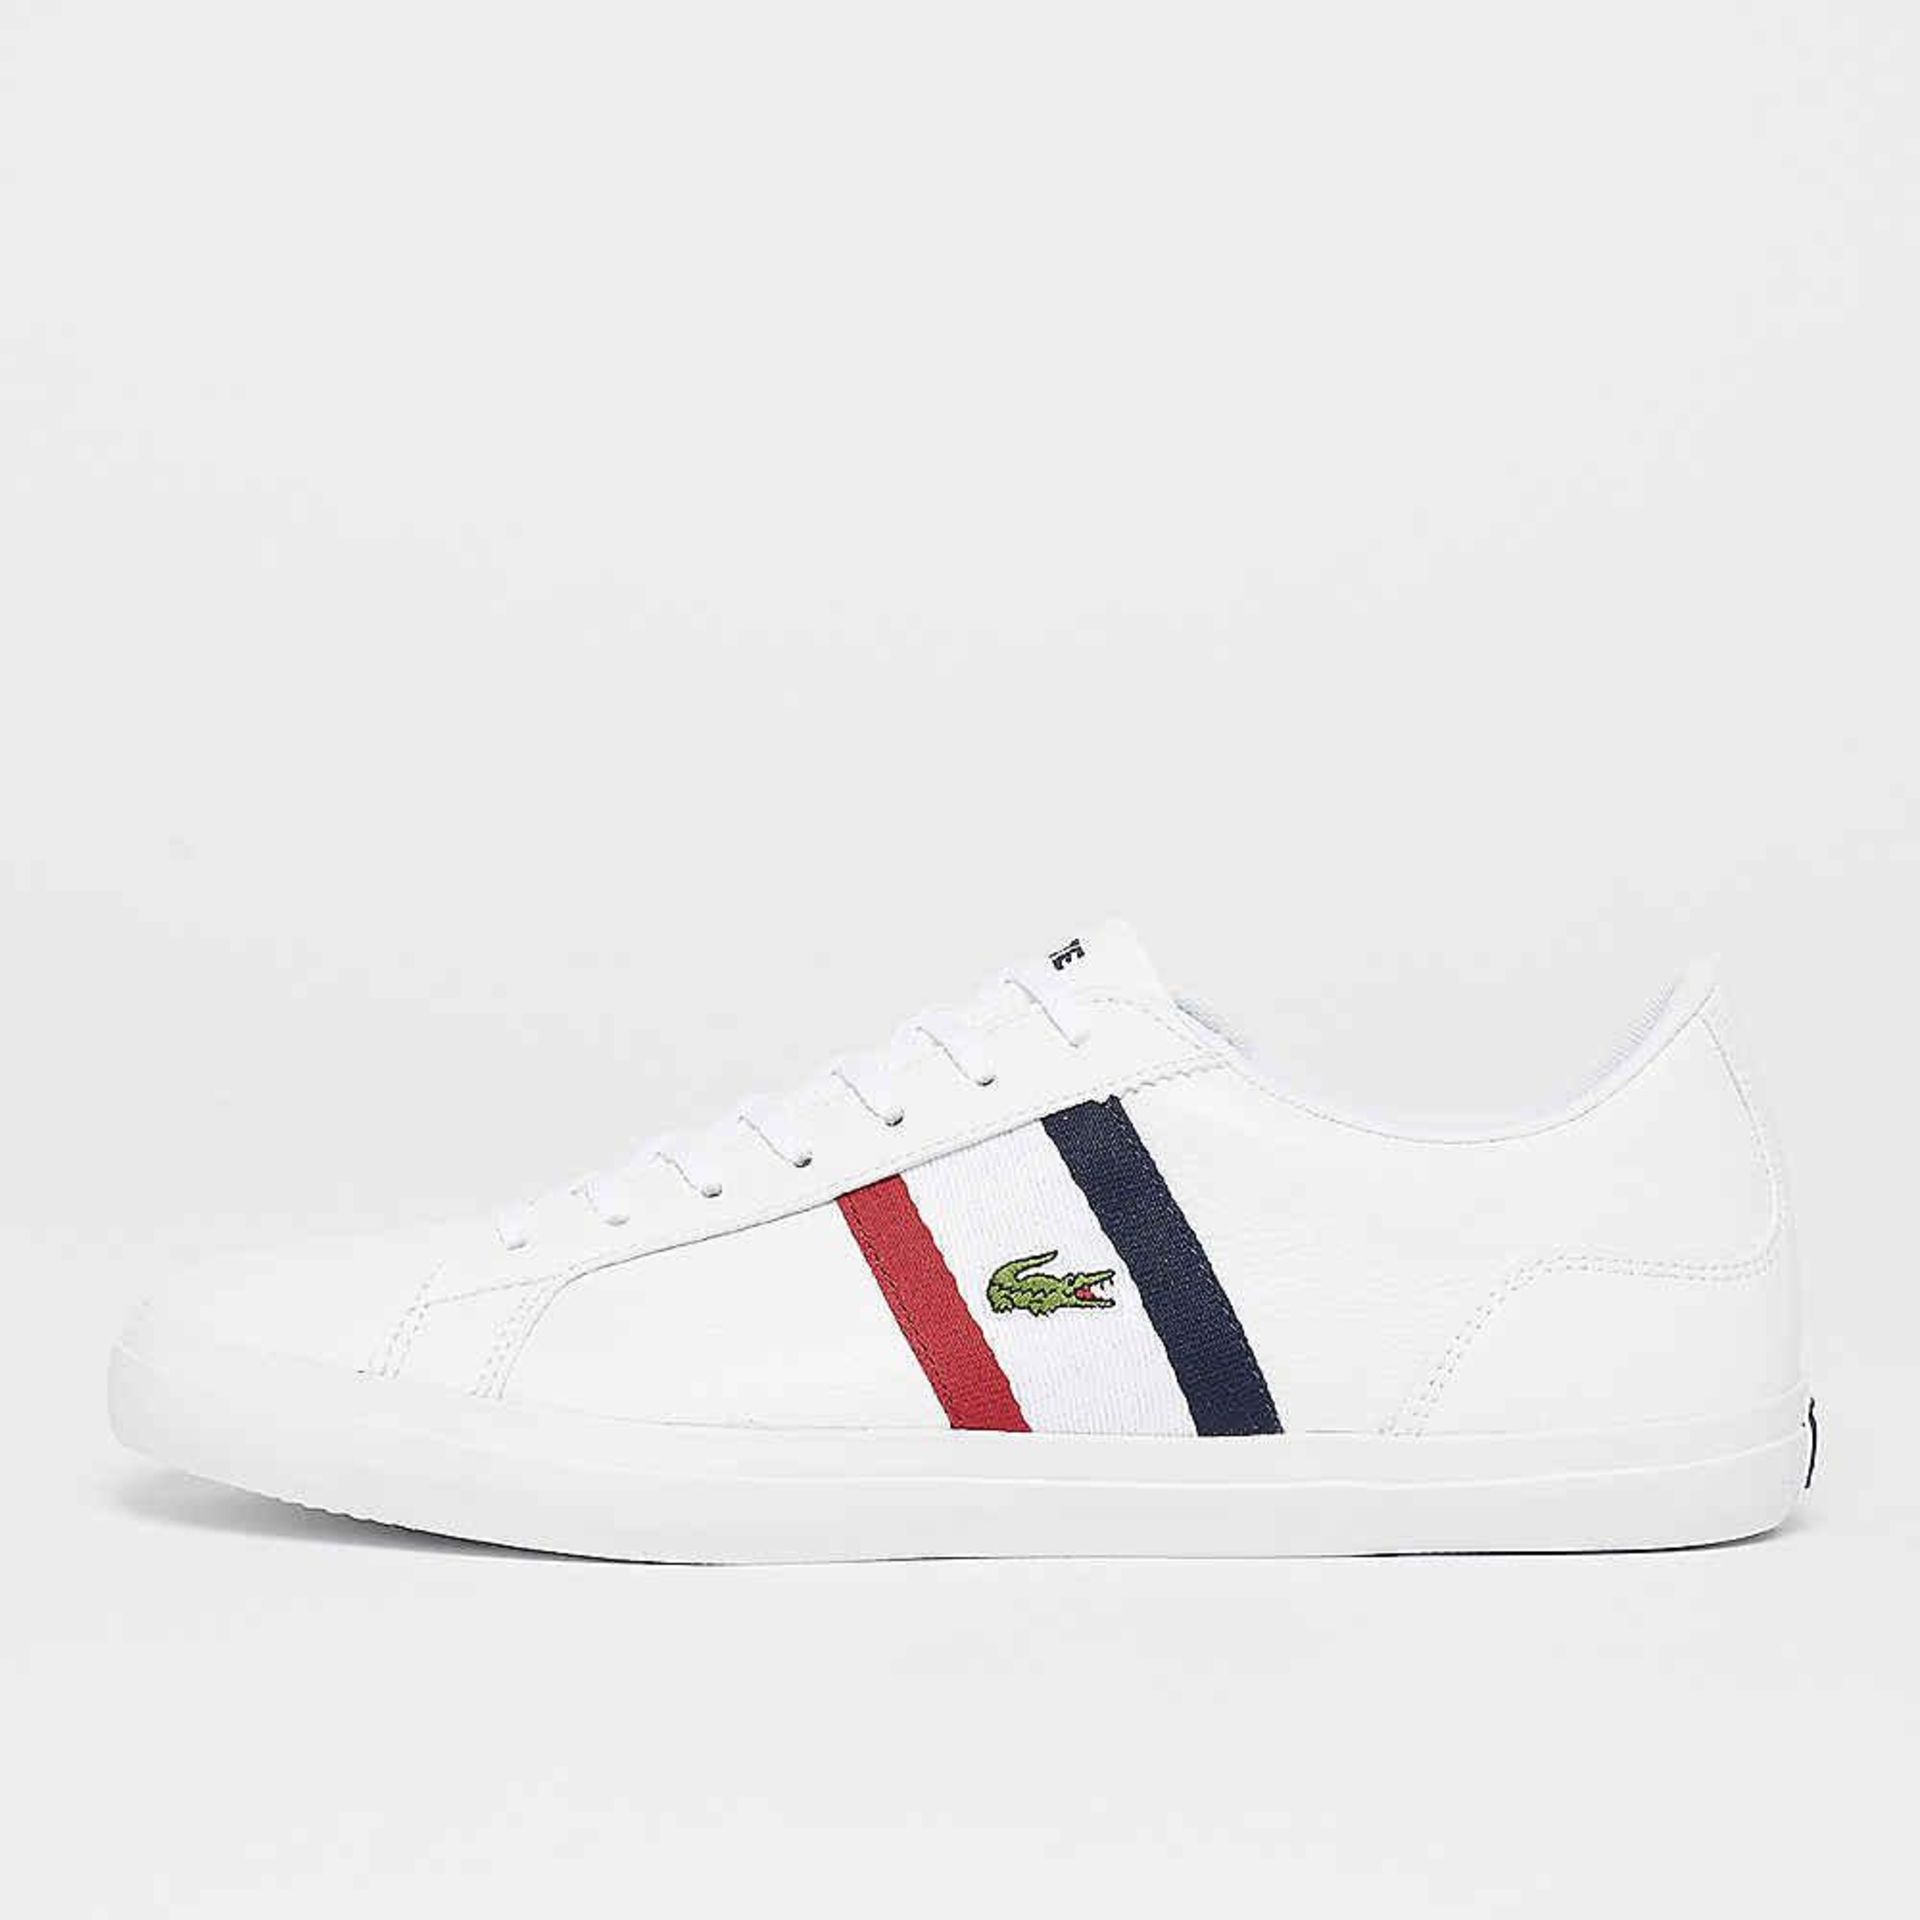 + VAT Brand New Lacoste Trainers UK Size 7 - White Red Navy - Leather and Sythetic - EU Size 40.5 -